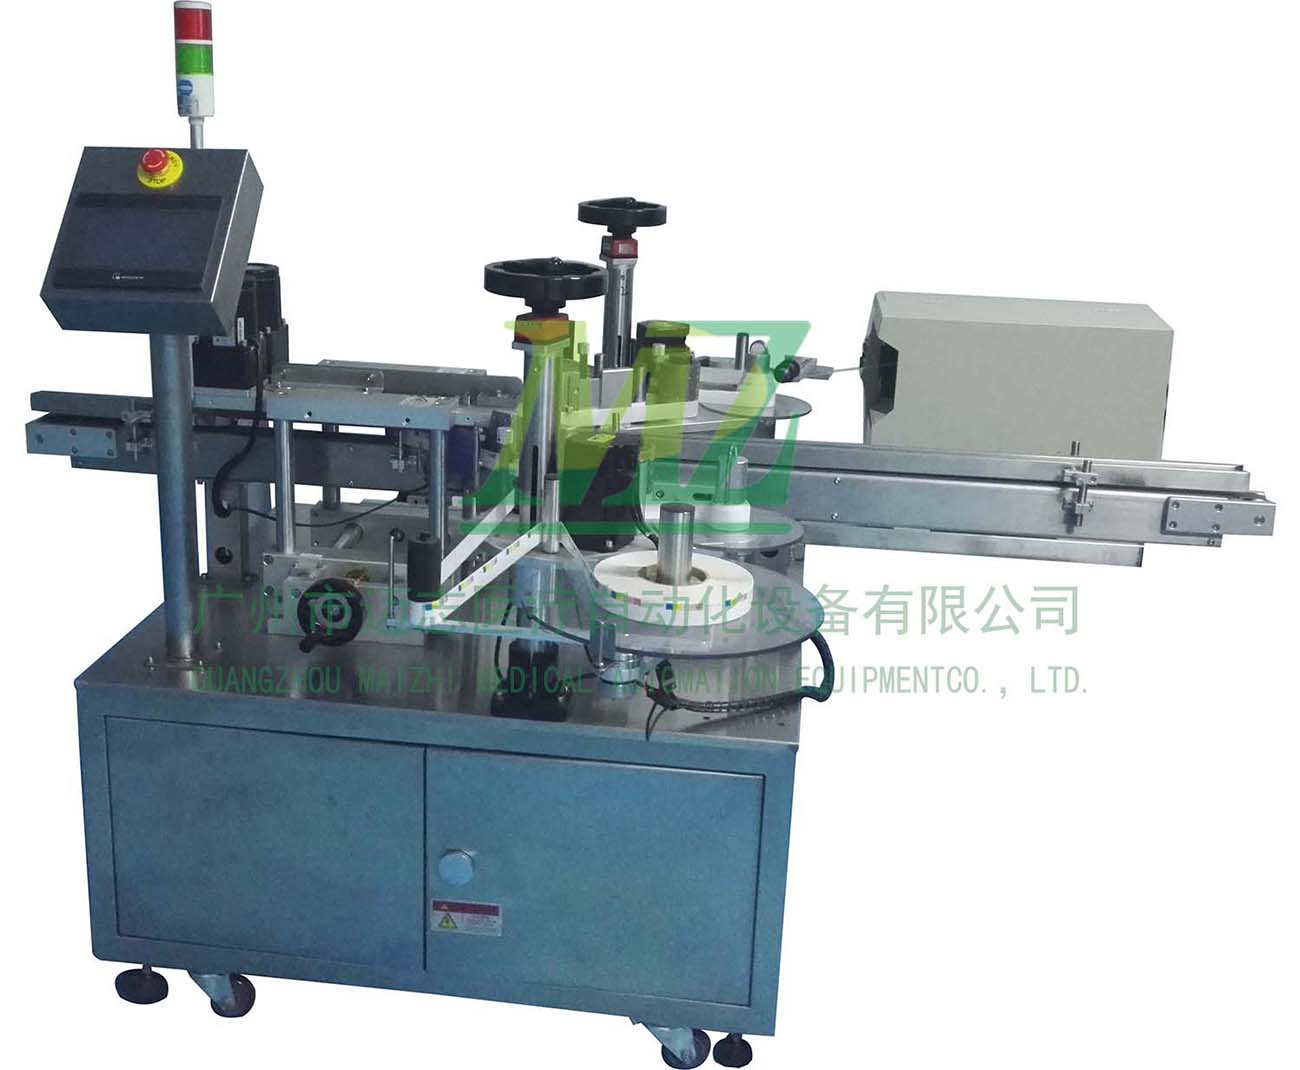 Double-sided Labeling Machine of Blood Typing Card